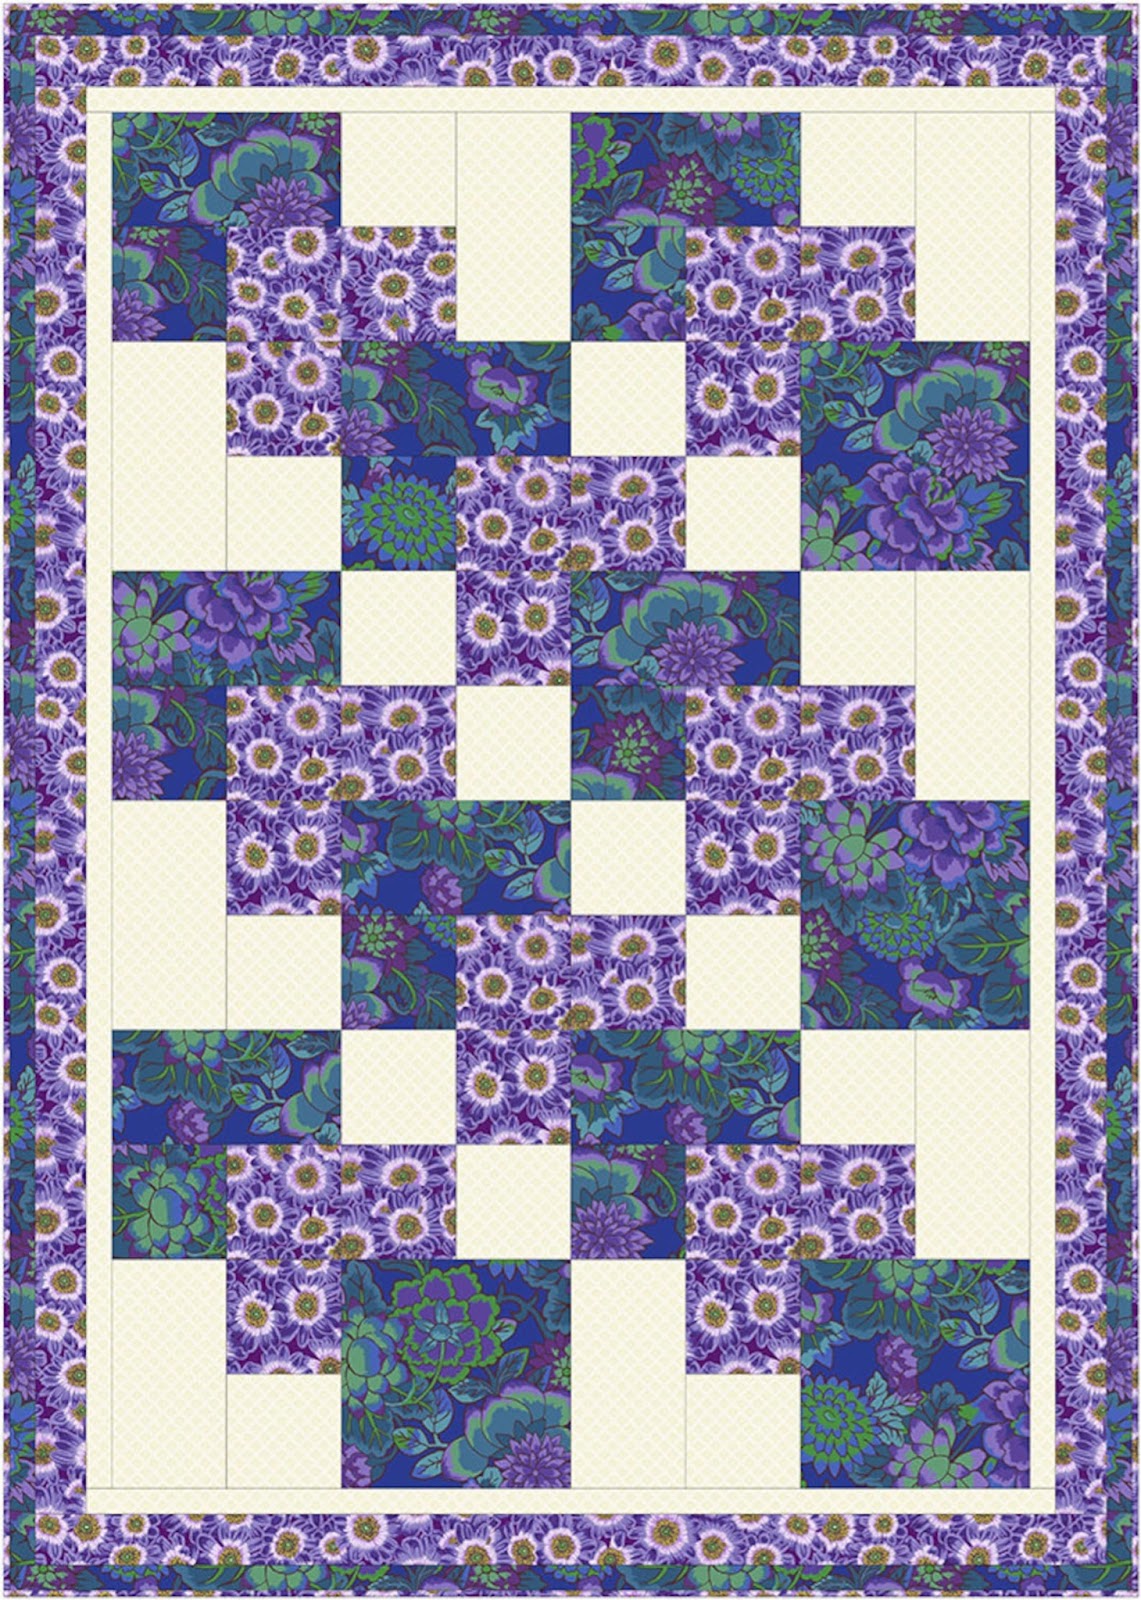 15 Fun And Easy 3 Yard Quilt Patterns